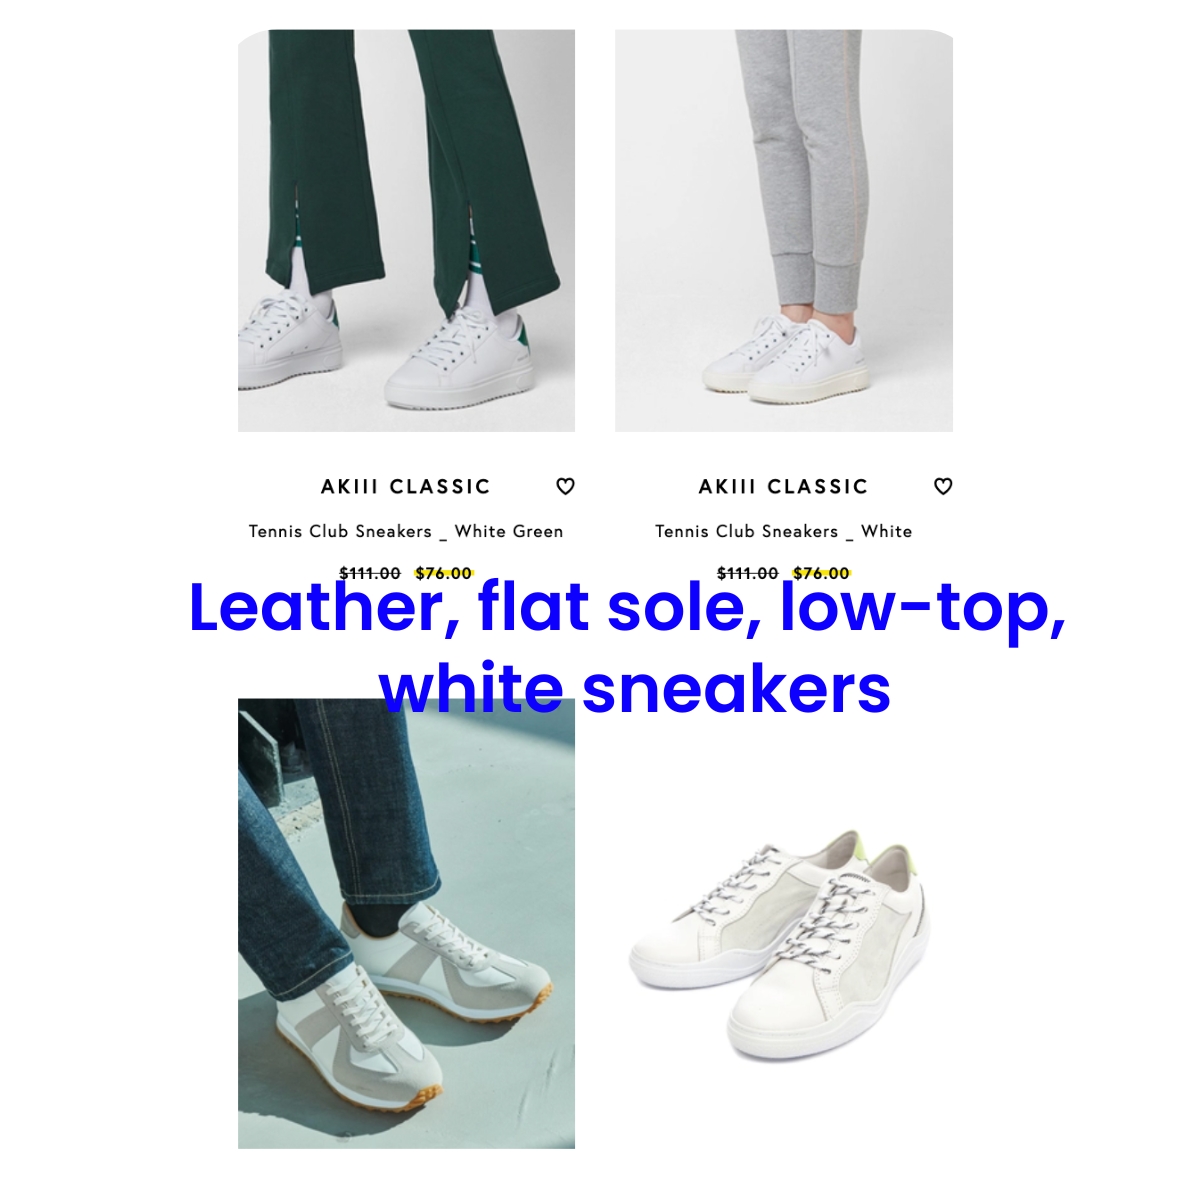 Leather, white, flat, low sole sneakers for men in just a few clicks